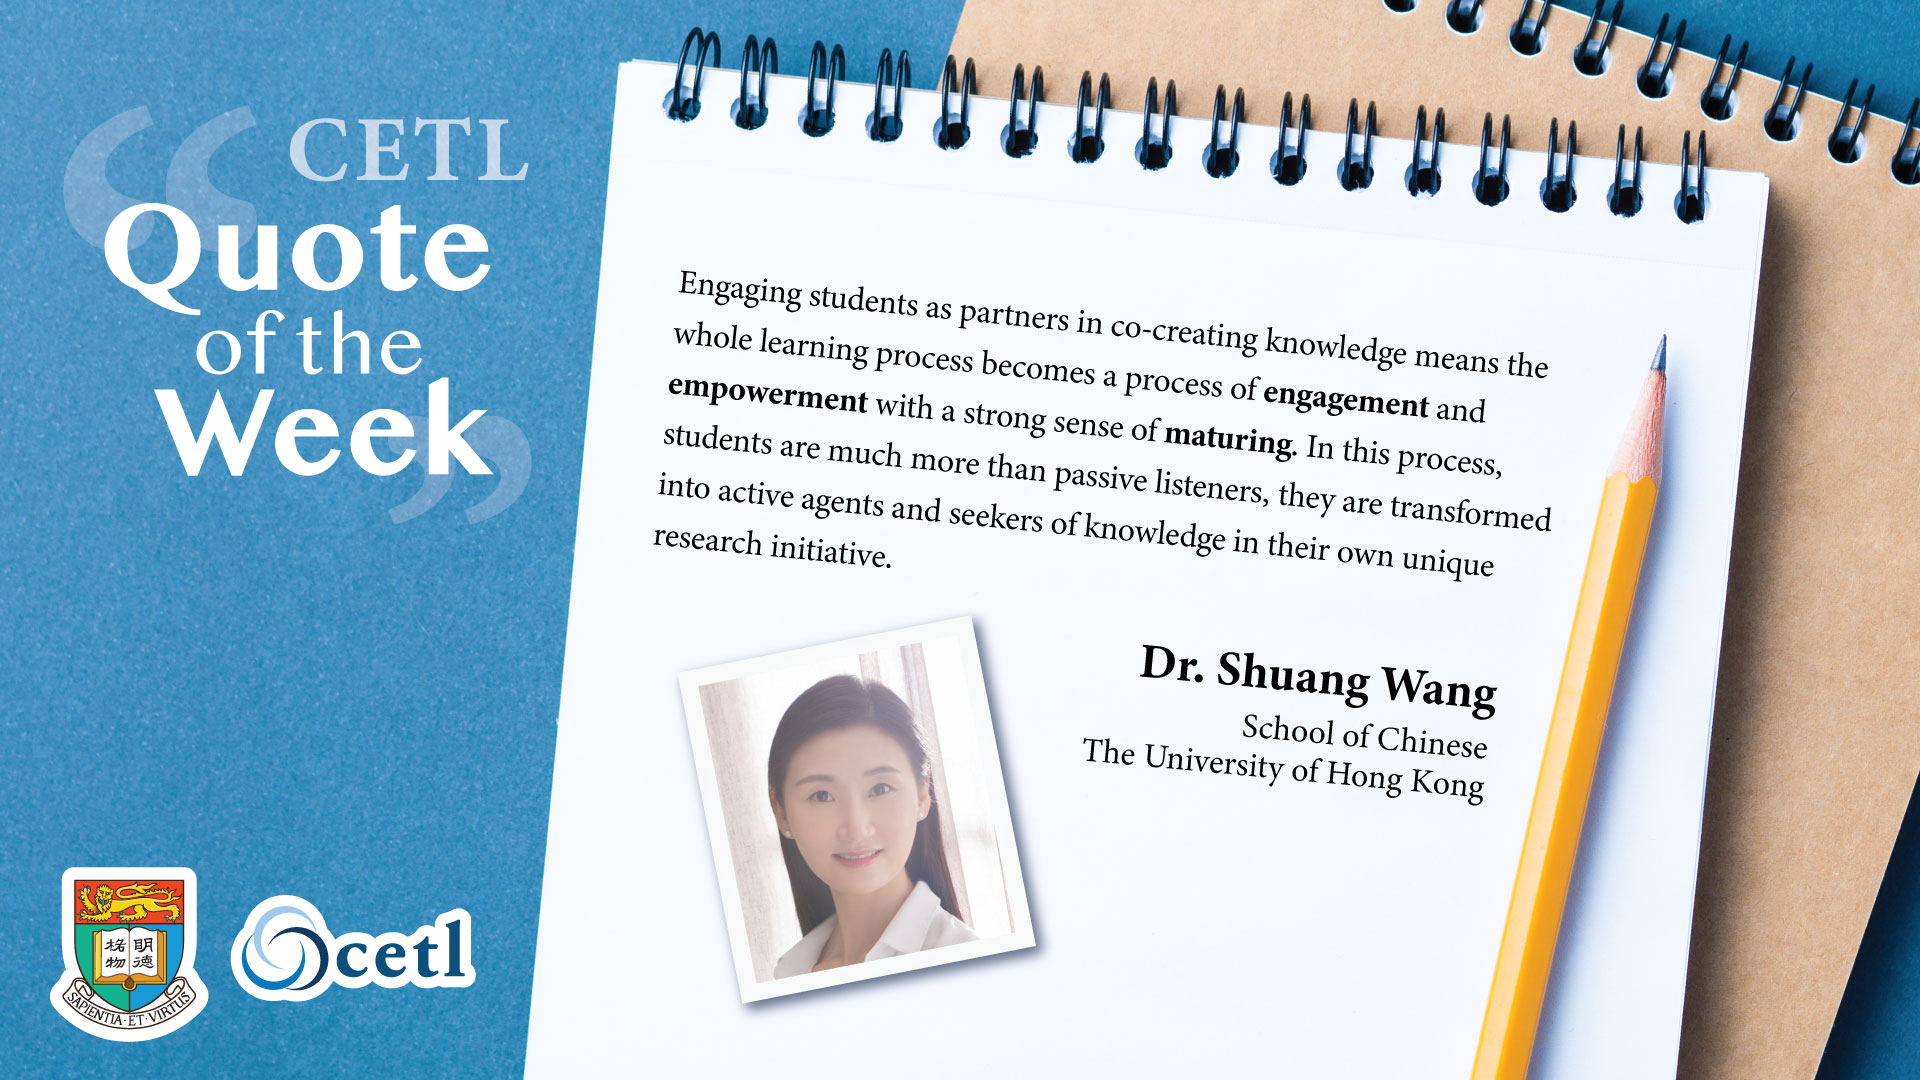 Dr. Wang Shuang - Engaging students as partners in co-creating knowledge means the whole learning process becomes a process of “engagement” and “empowerment” with a strong sense of “maturing”. In this process, students are much more than passive listeners, they are transformed into active agents and seekers of knowledge in their own unique research initiative.